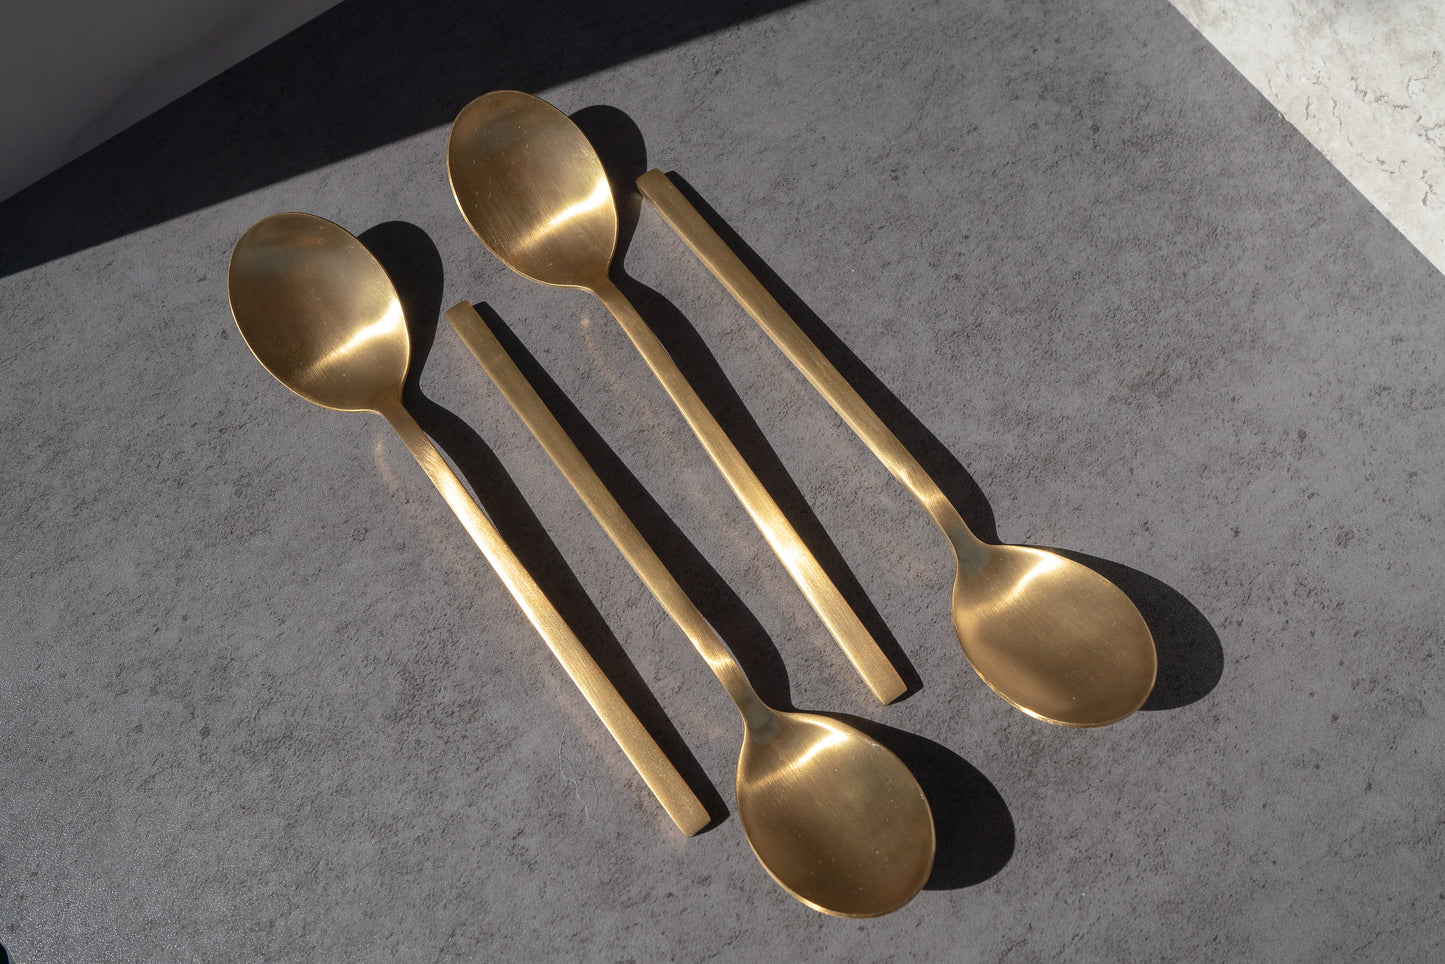 brushed gold spoons, set of 4